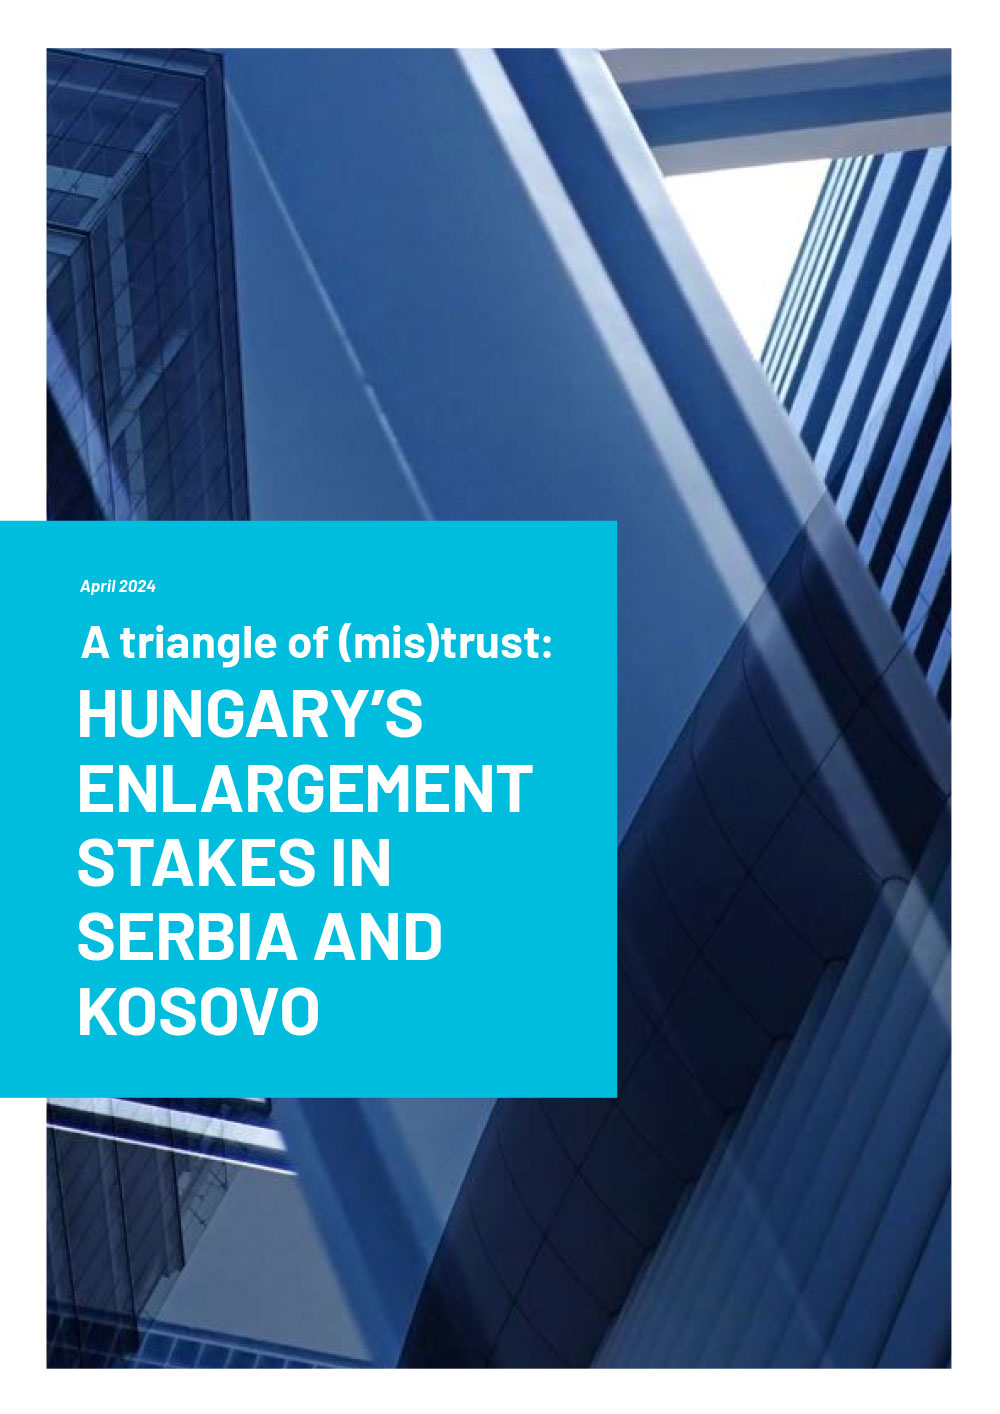 Analysis - A triangle of (mis)trust - Hungary’s enlargement stakes in Serbia and Kosovo